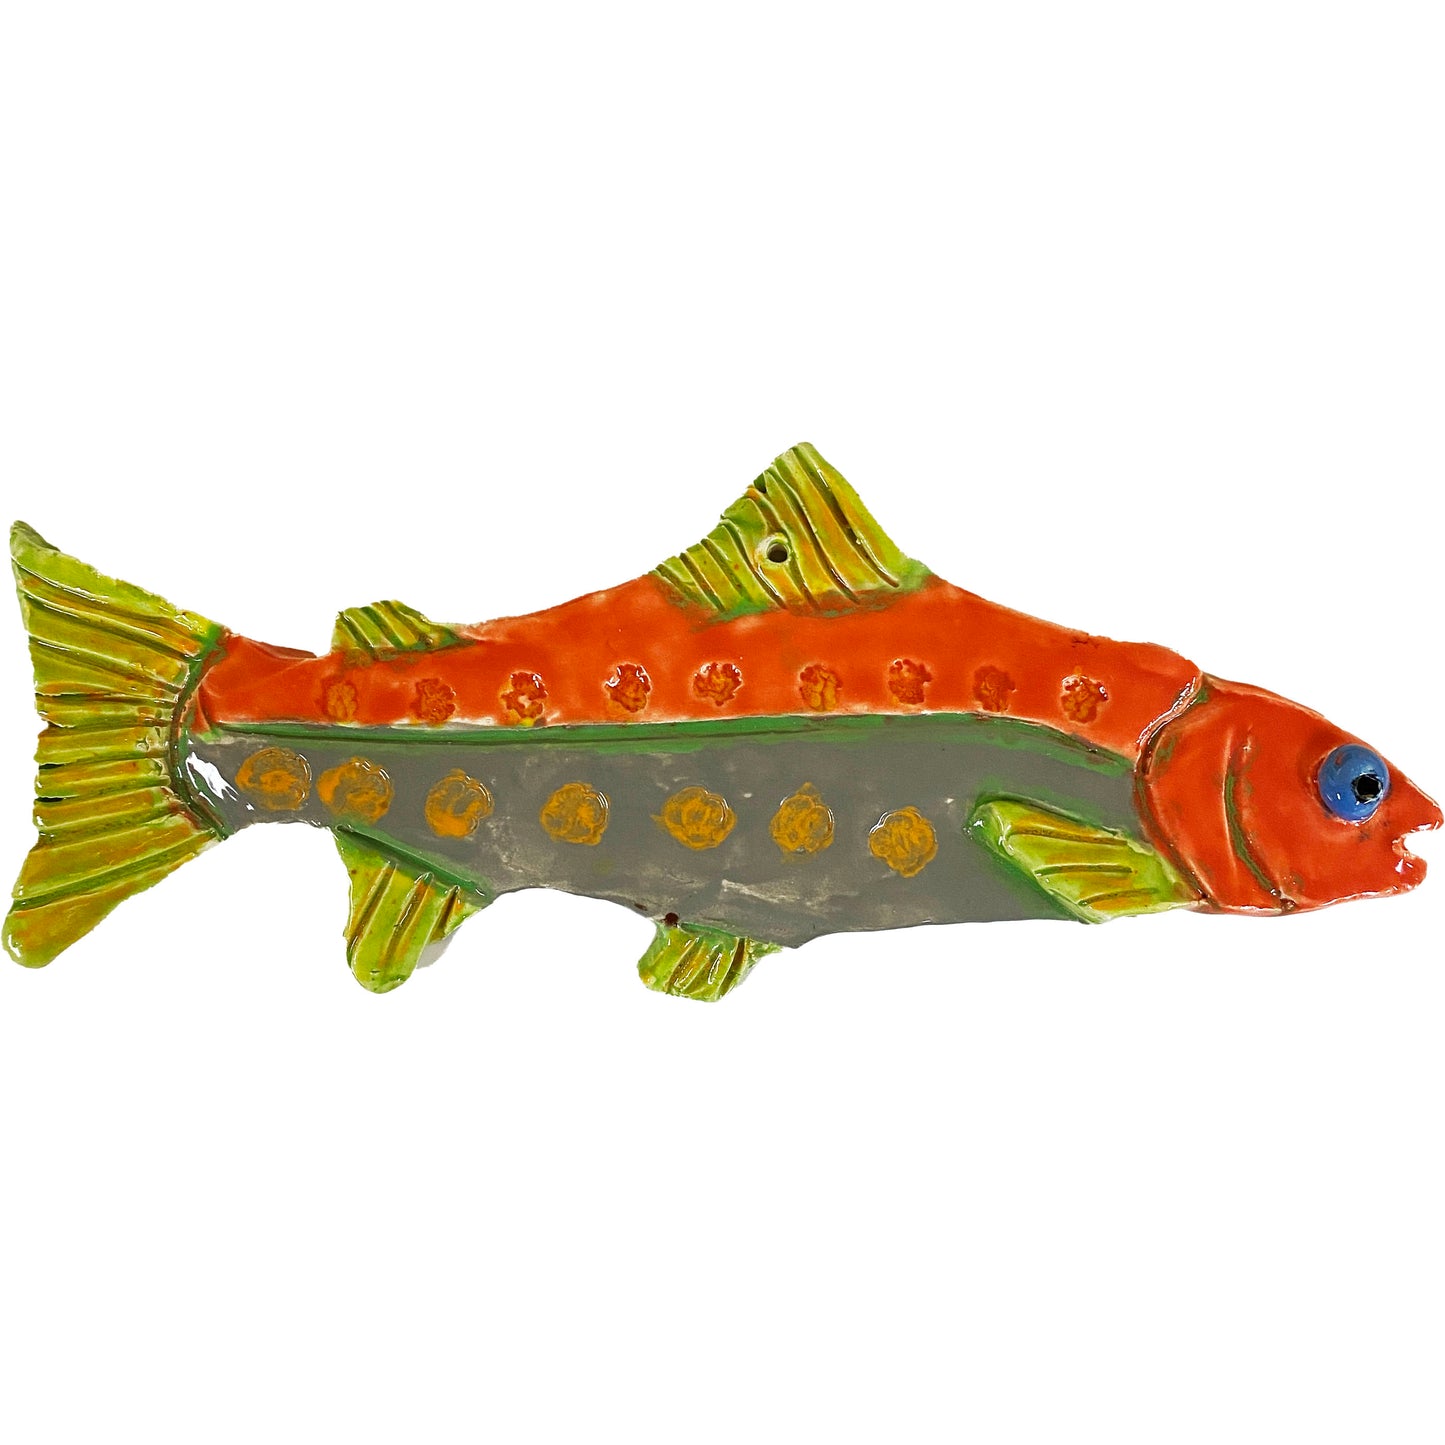 Ceramic Arts Handmade Clay Crafts Fresh Fish Glazed 10-inch x 4-inch Trout made by Perry Miller